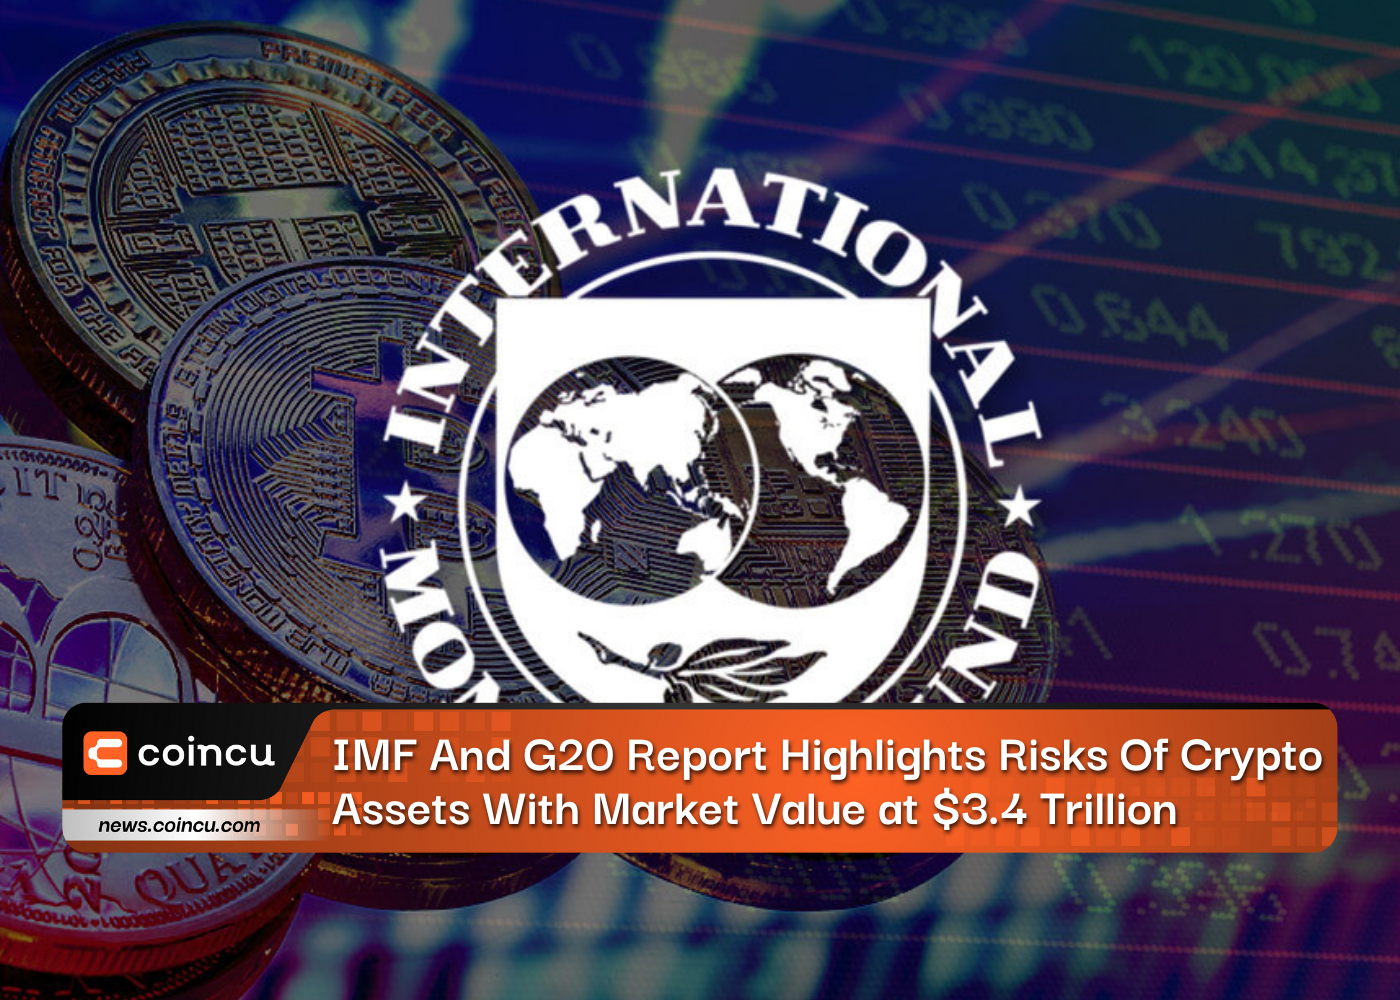 IMF And G20 Report Highlights Risks Of Crypto Assets With Market Value at $3.4 Trillion